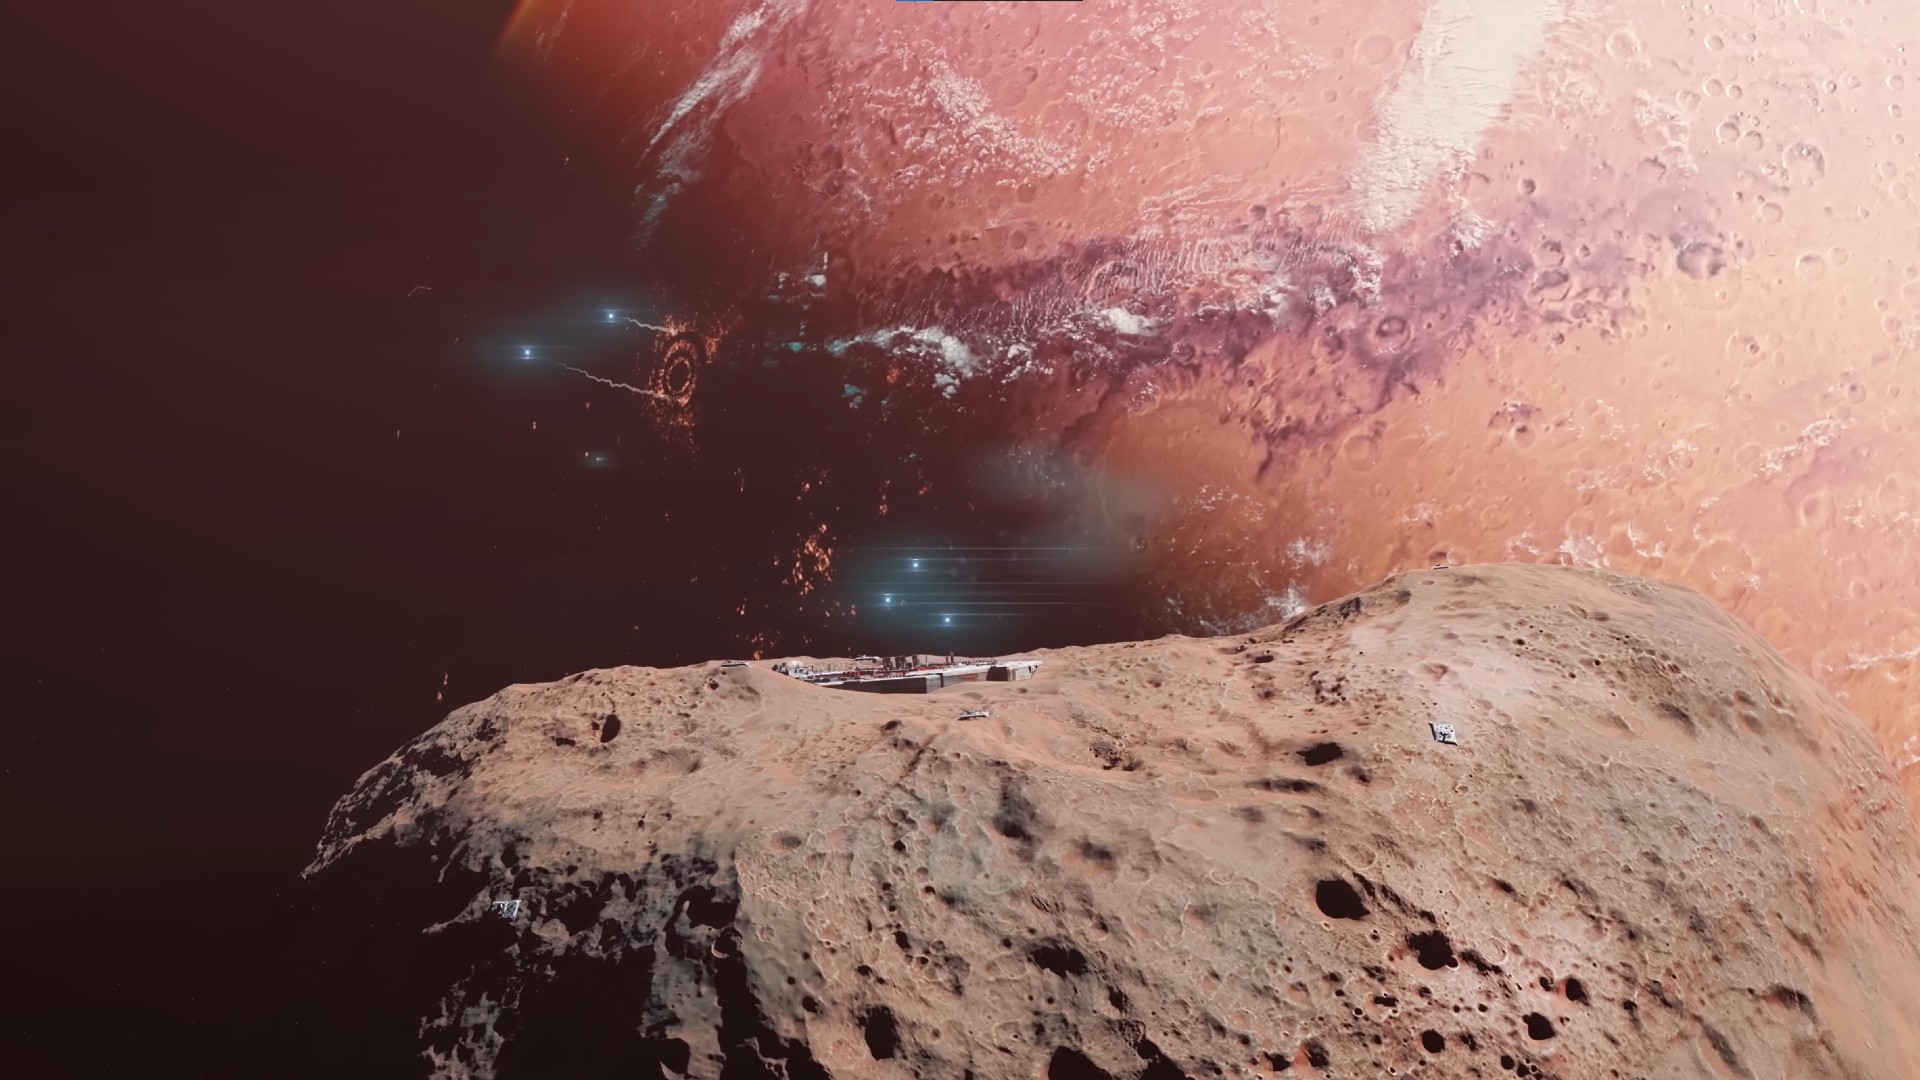 spaceships launch from a rocky moon in front of a large reddish-orange planet